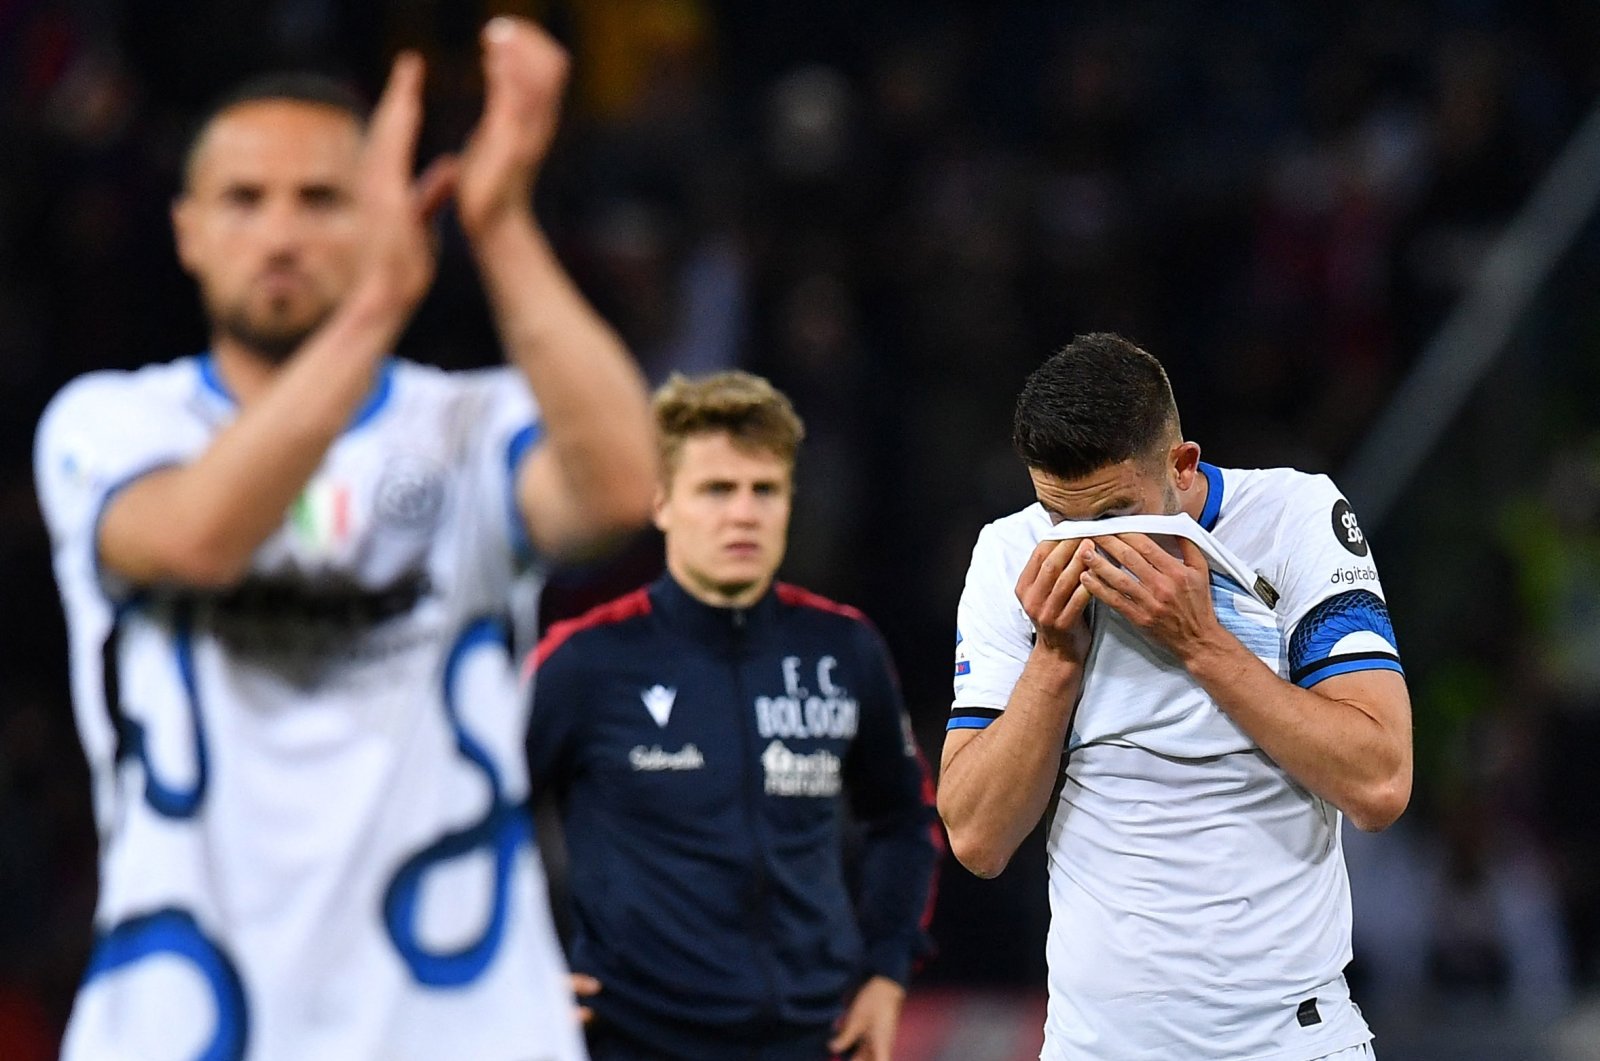 Inter Milan&#039;s Roberto Gagliardini (R) looks dejected after losing against Bologna in the Serie A, Bologna, Italy, April 27, 2022. (Reuters Photo)